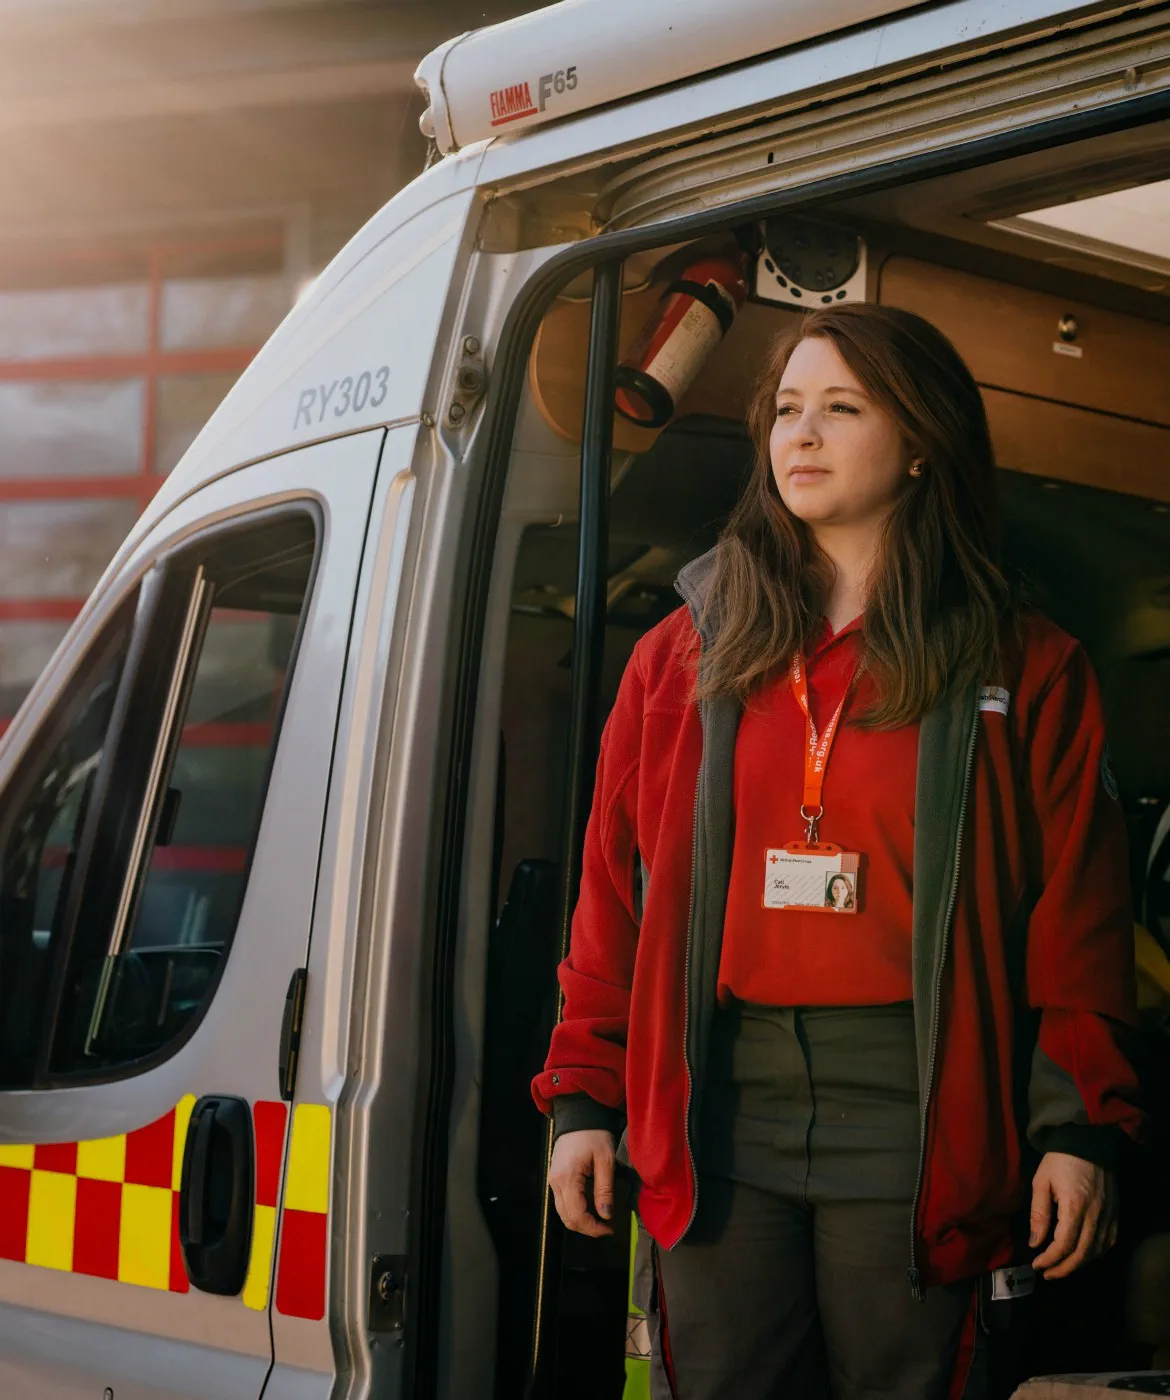 Red Cross Volunteer stands ready in Ambulance